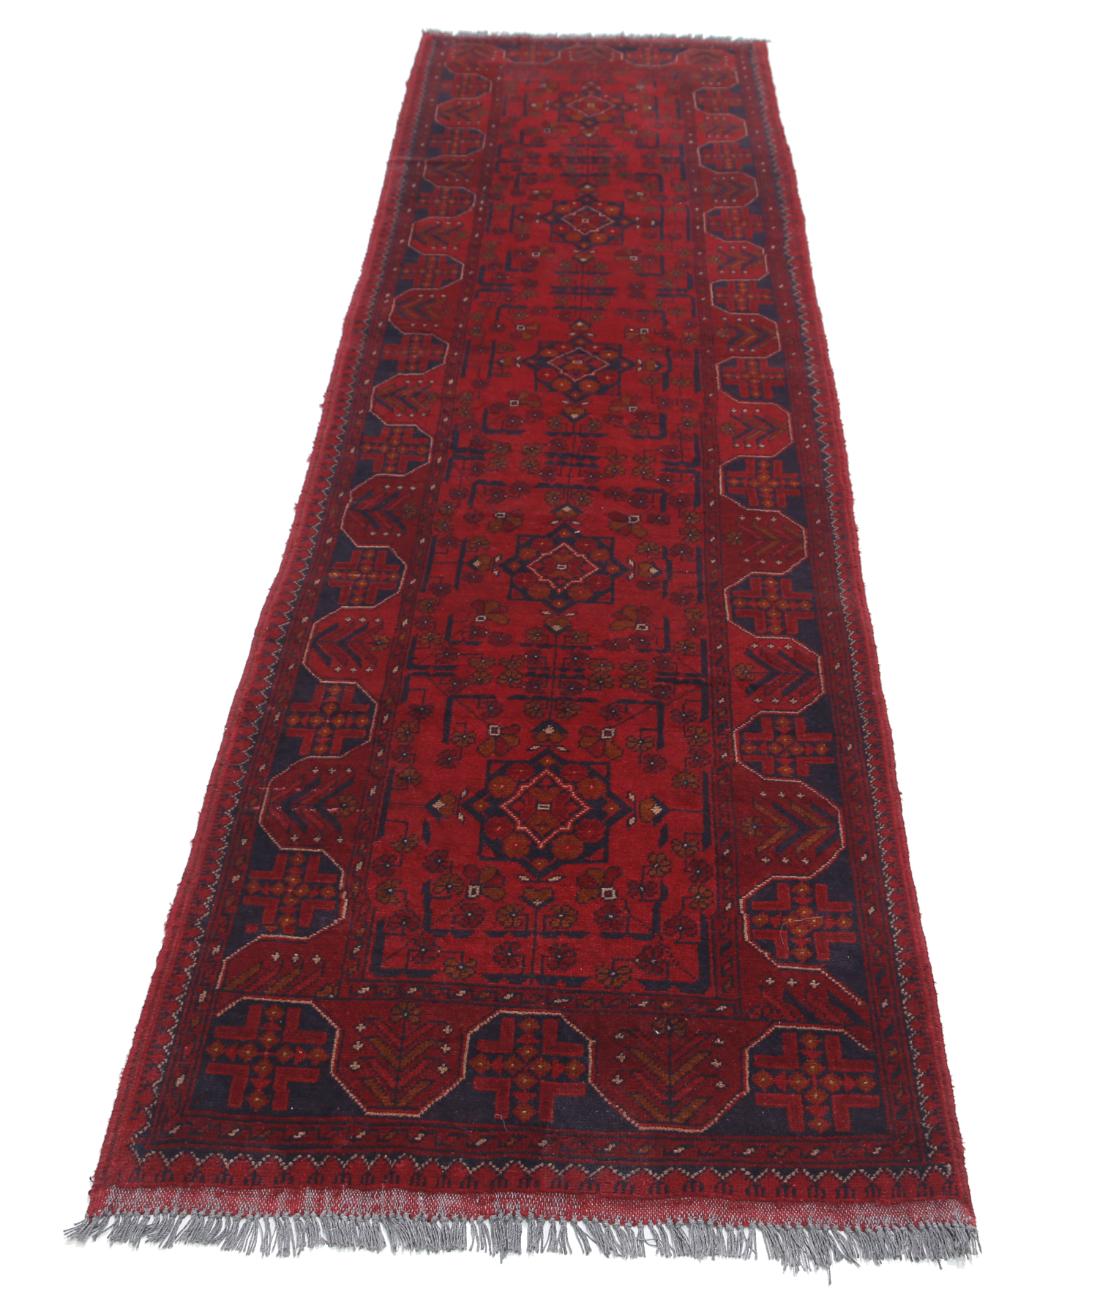 Hand Knotted Afghan Khal Muhammadi Wool Rug - 2'7'' x 9'7'' 2' 7" X 9' 7" (79 X 292) / Red / Blue